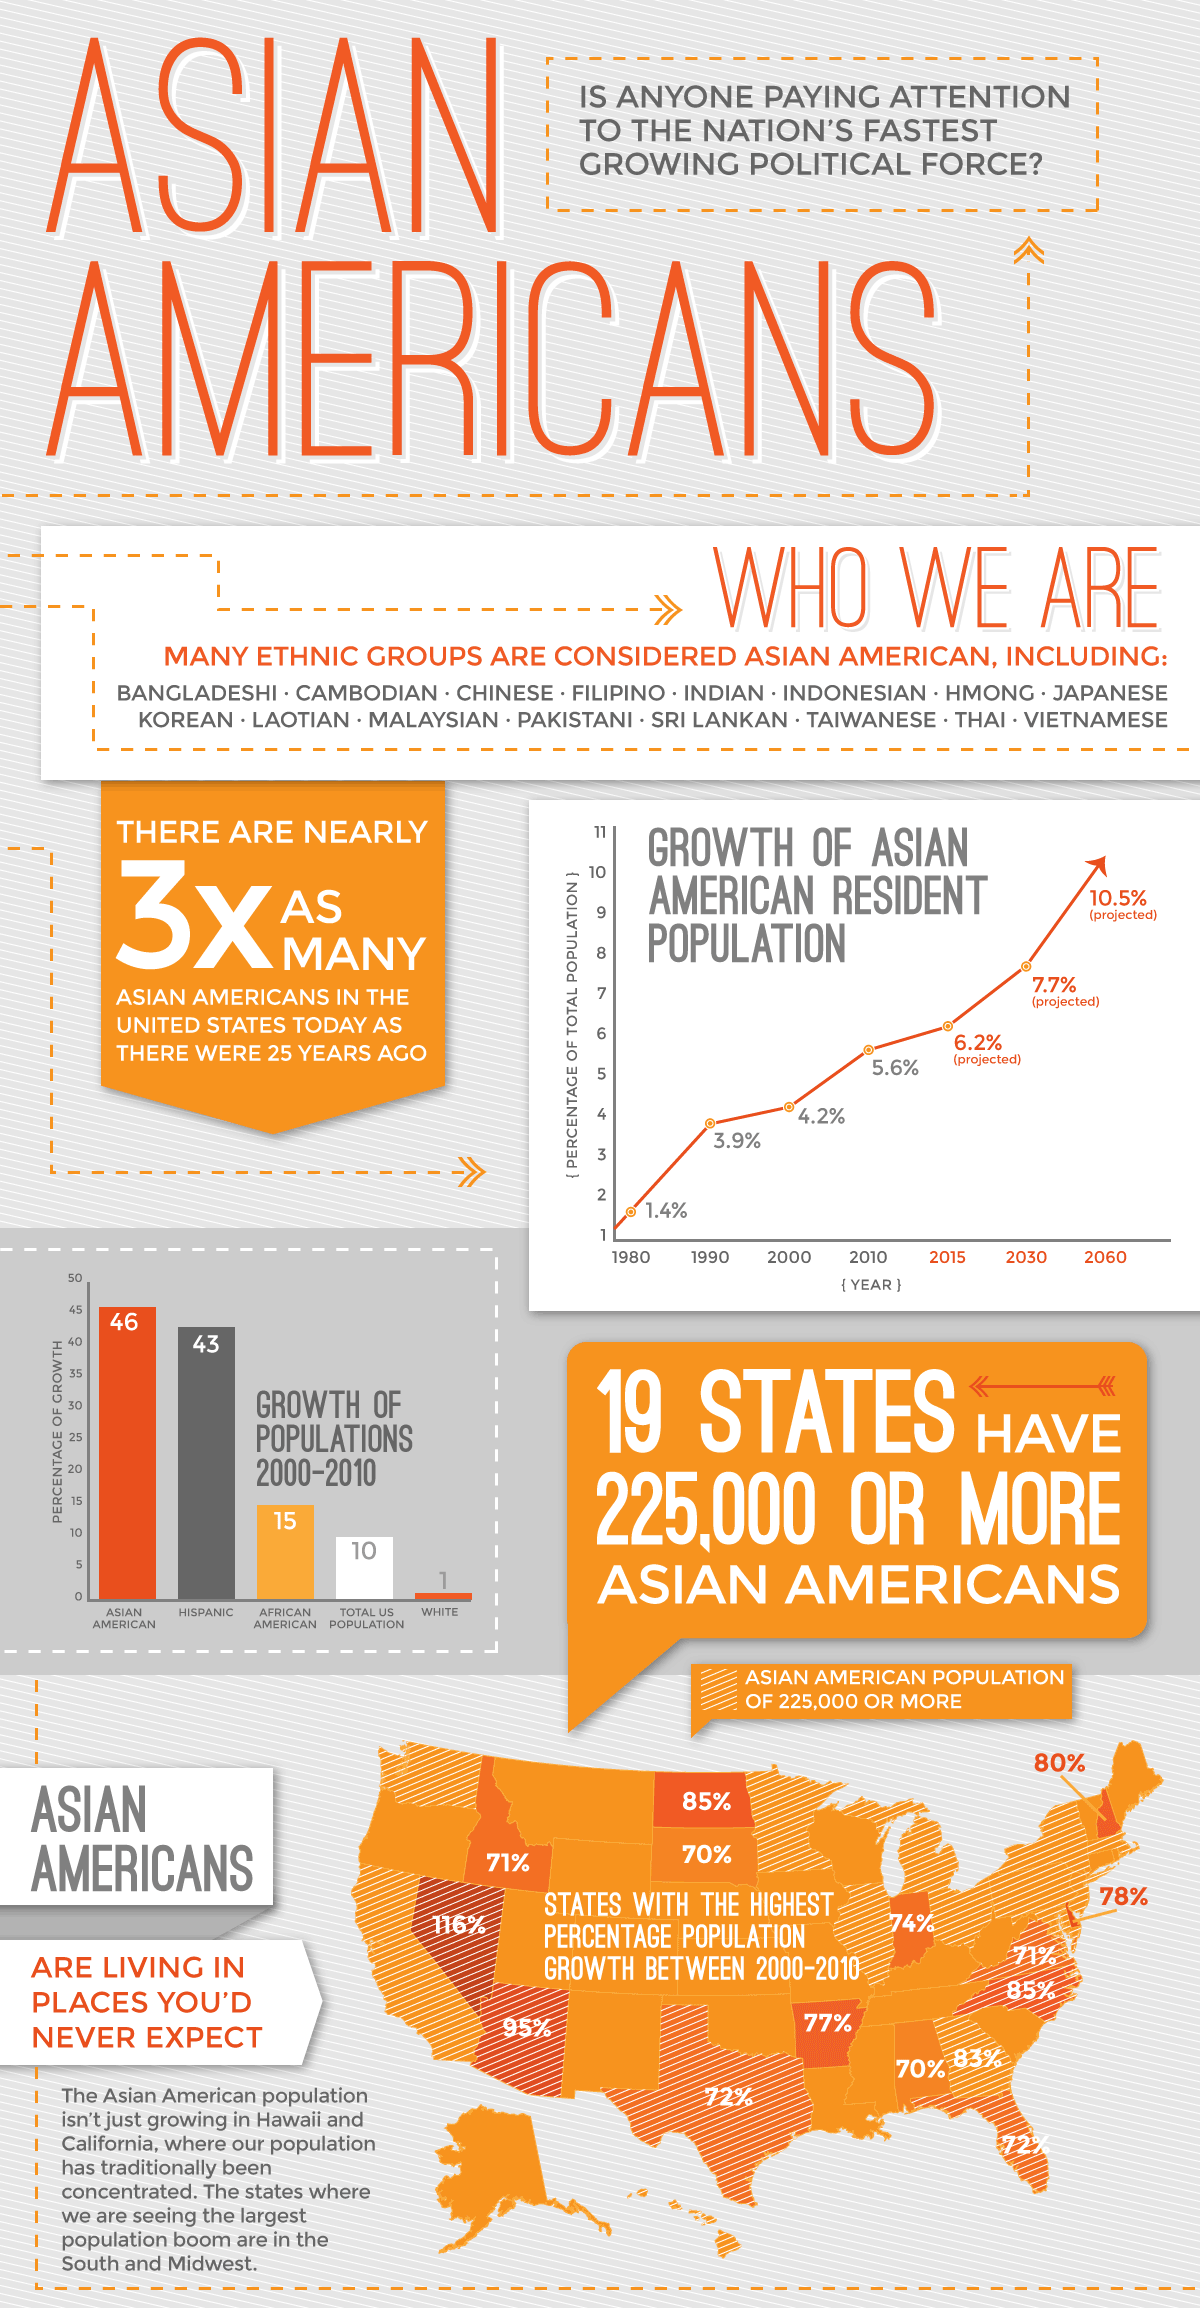 Infographic about Asian American voters in 2014